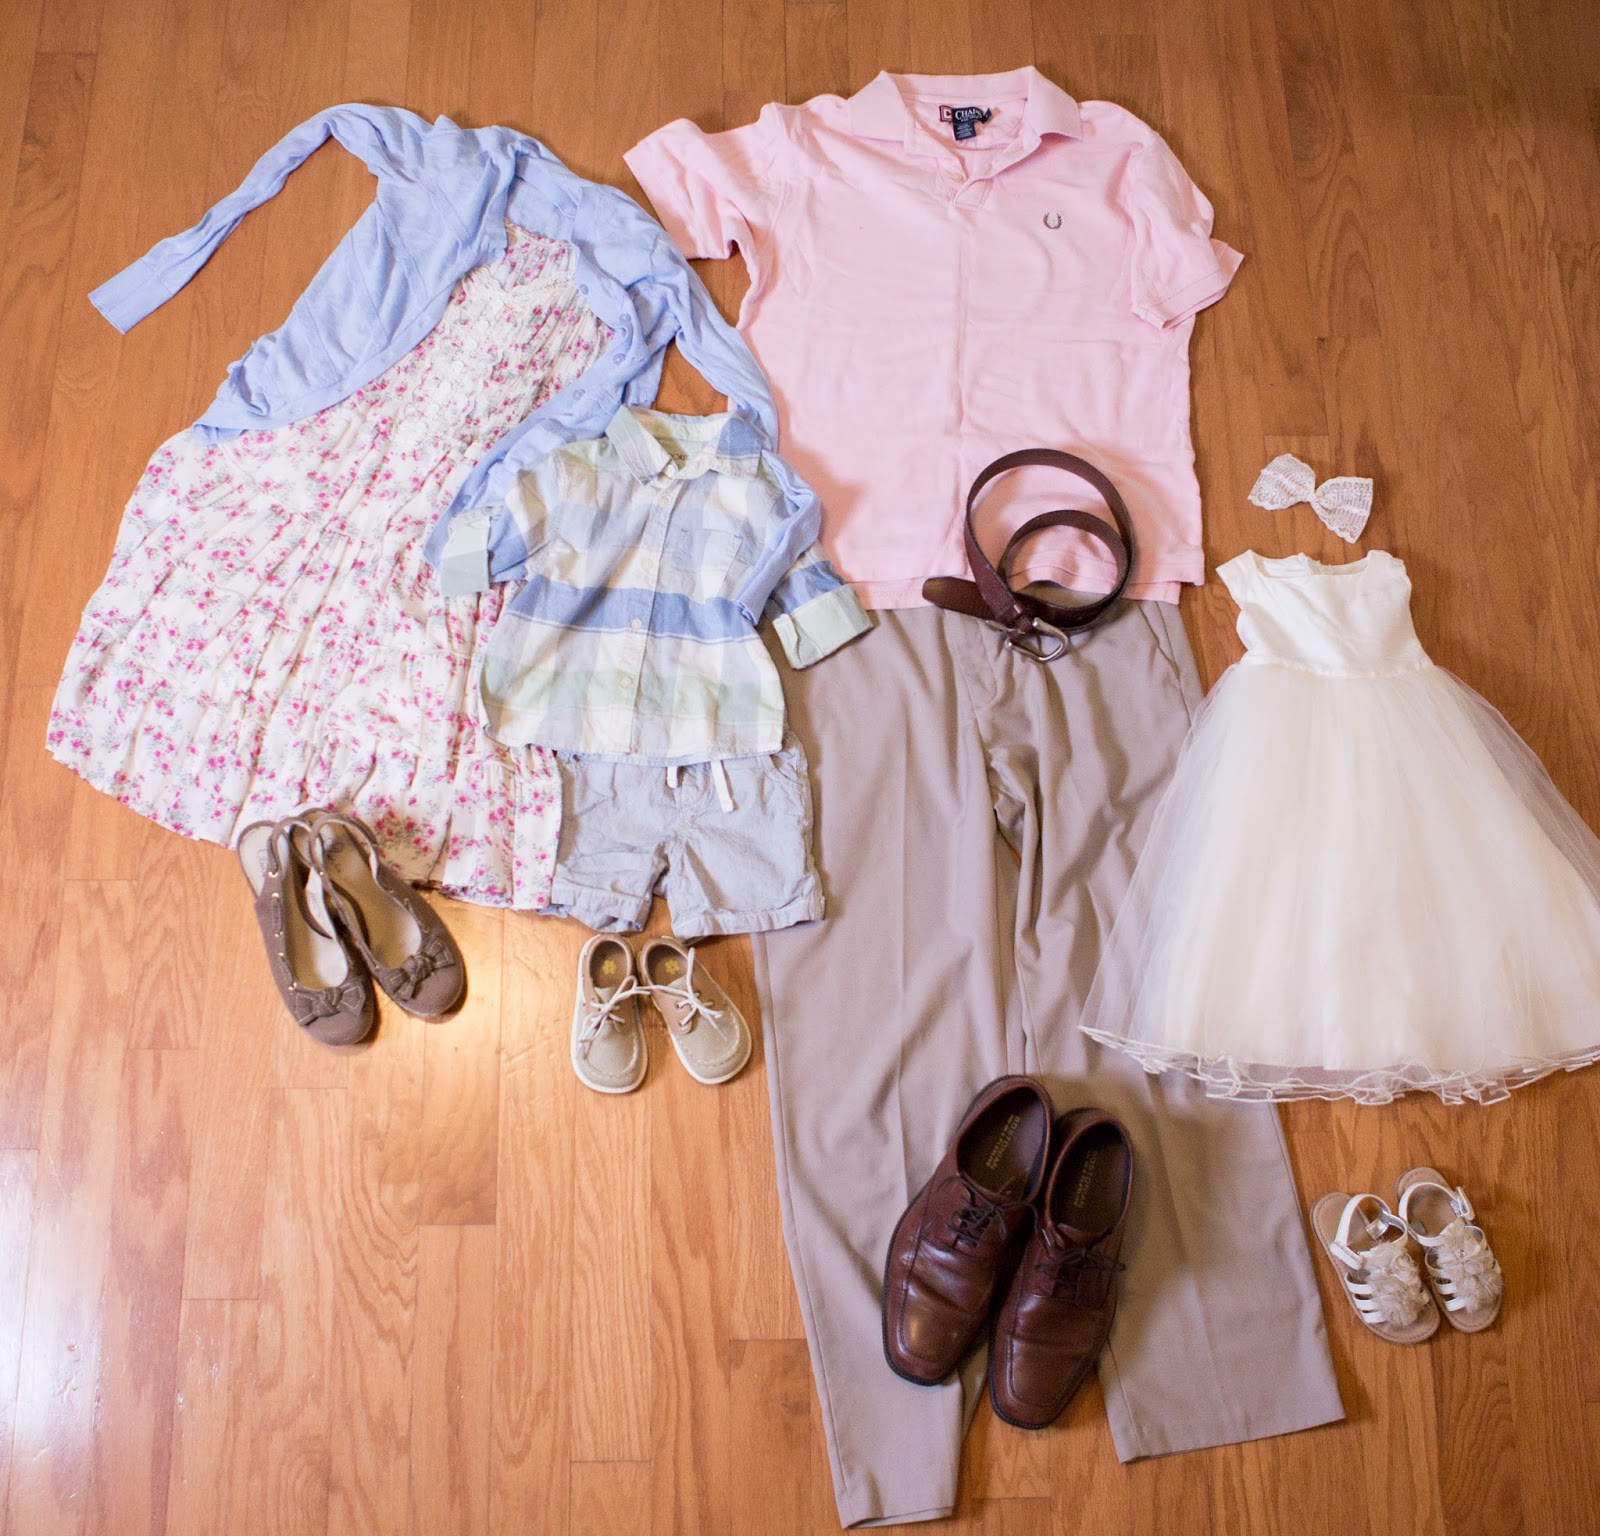 what to wear for family pictures, how to plan your outfits for family pictures, choosing your outfits for family pictures, family portrait photography, spring family outfit ideas